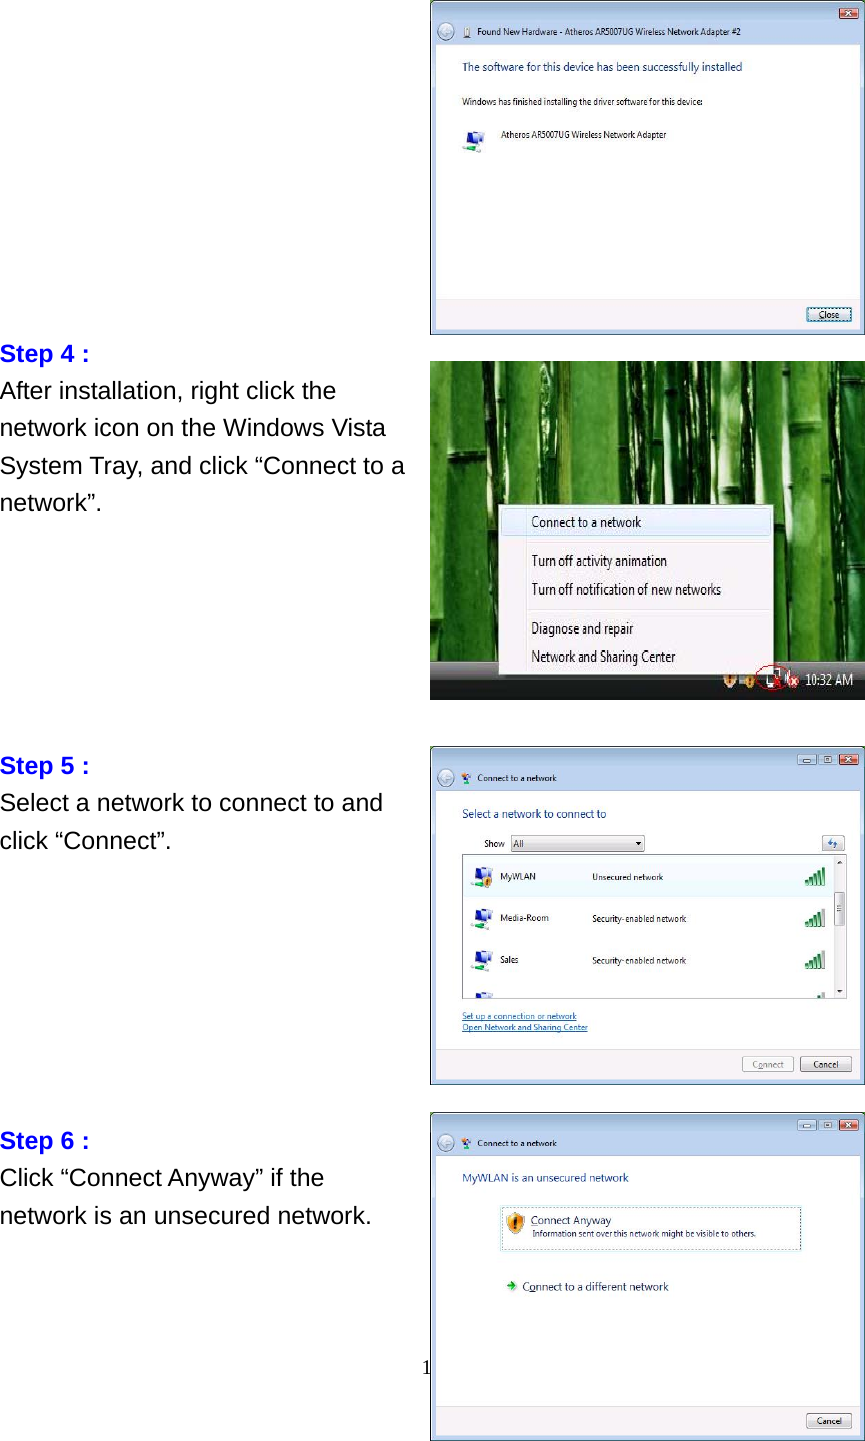    19             Step 4 : After installation, right click the network icon on the Windows Vista System Tray, and click “Connect to a network”.       Step 5 : Select a network to connect to and click “Connect”.                Step 6 : Click “Connect Anyway” if the network is an unsecured network.   